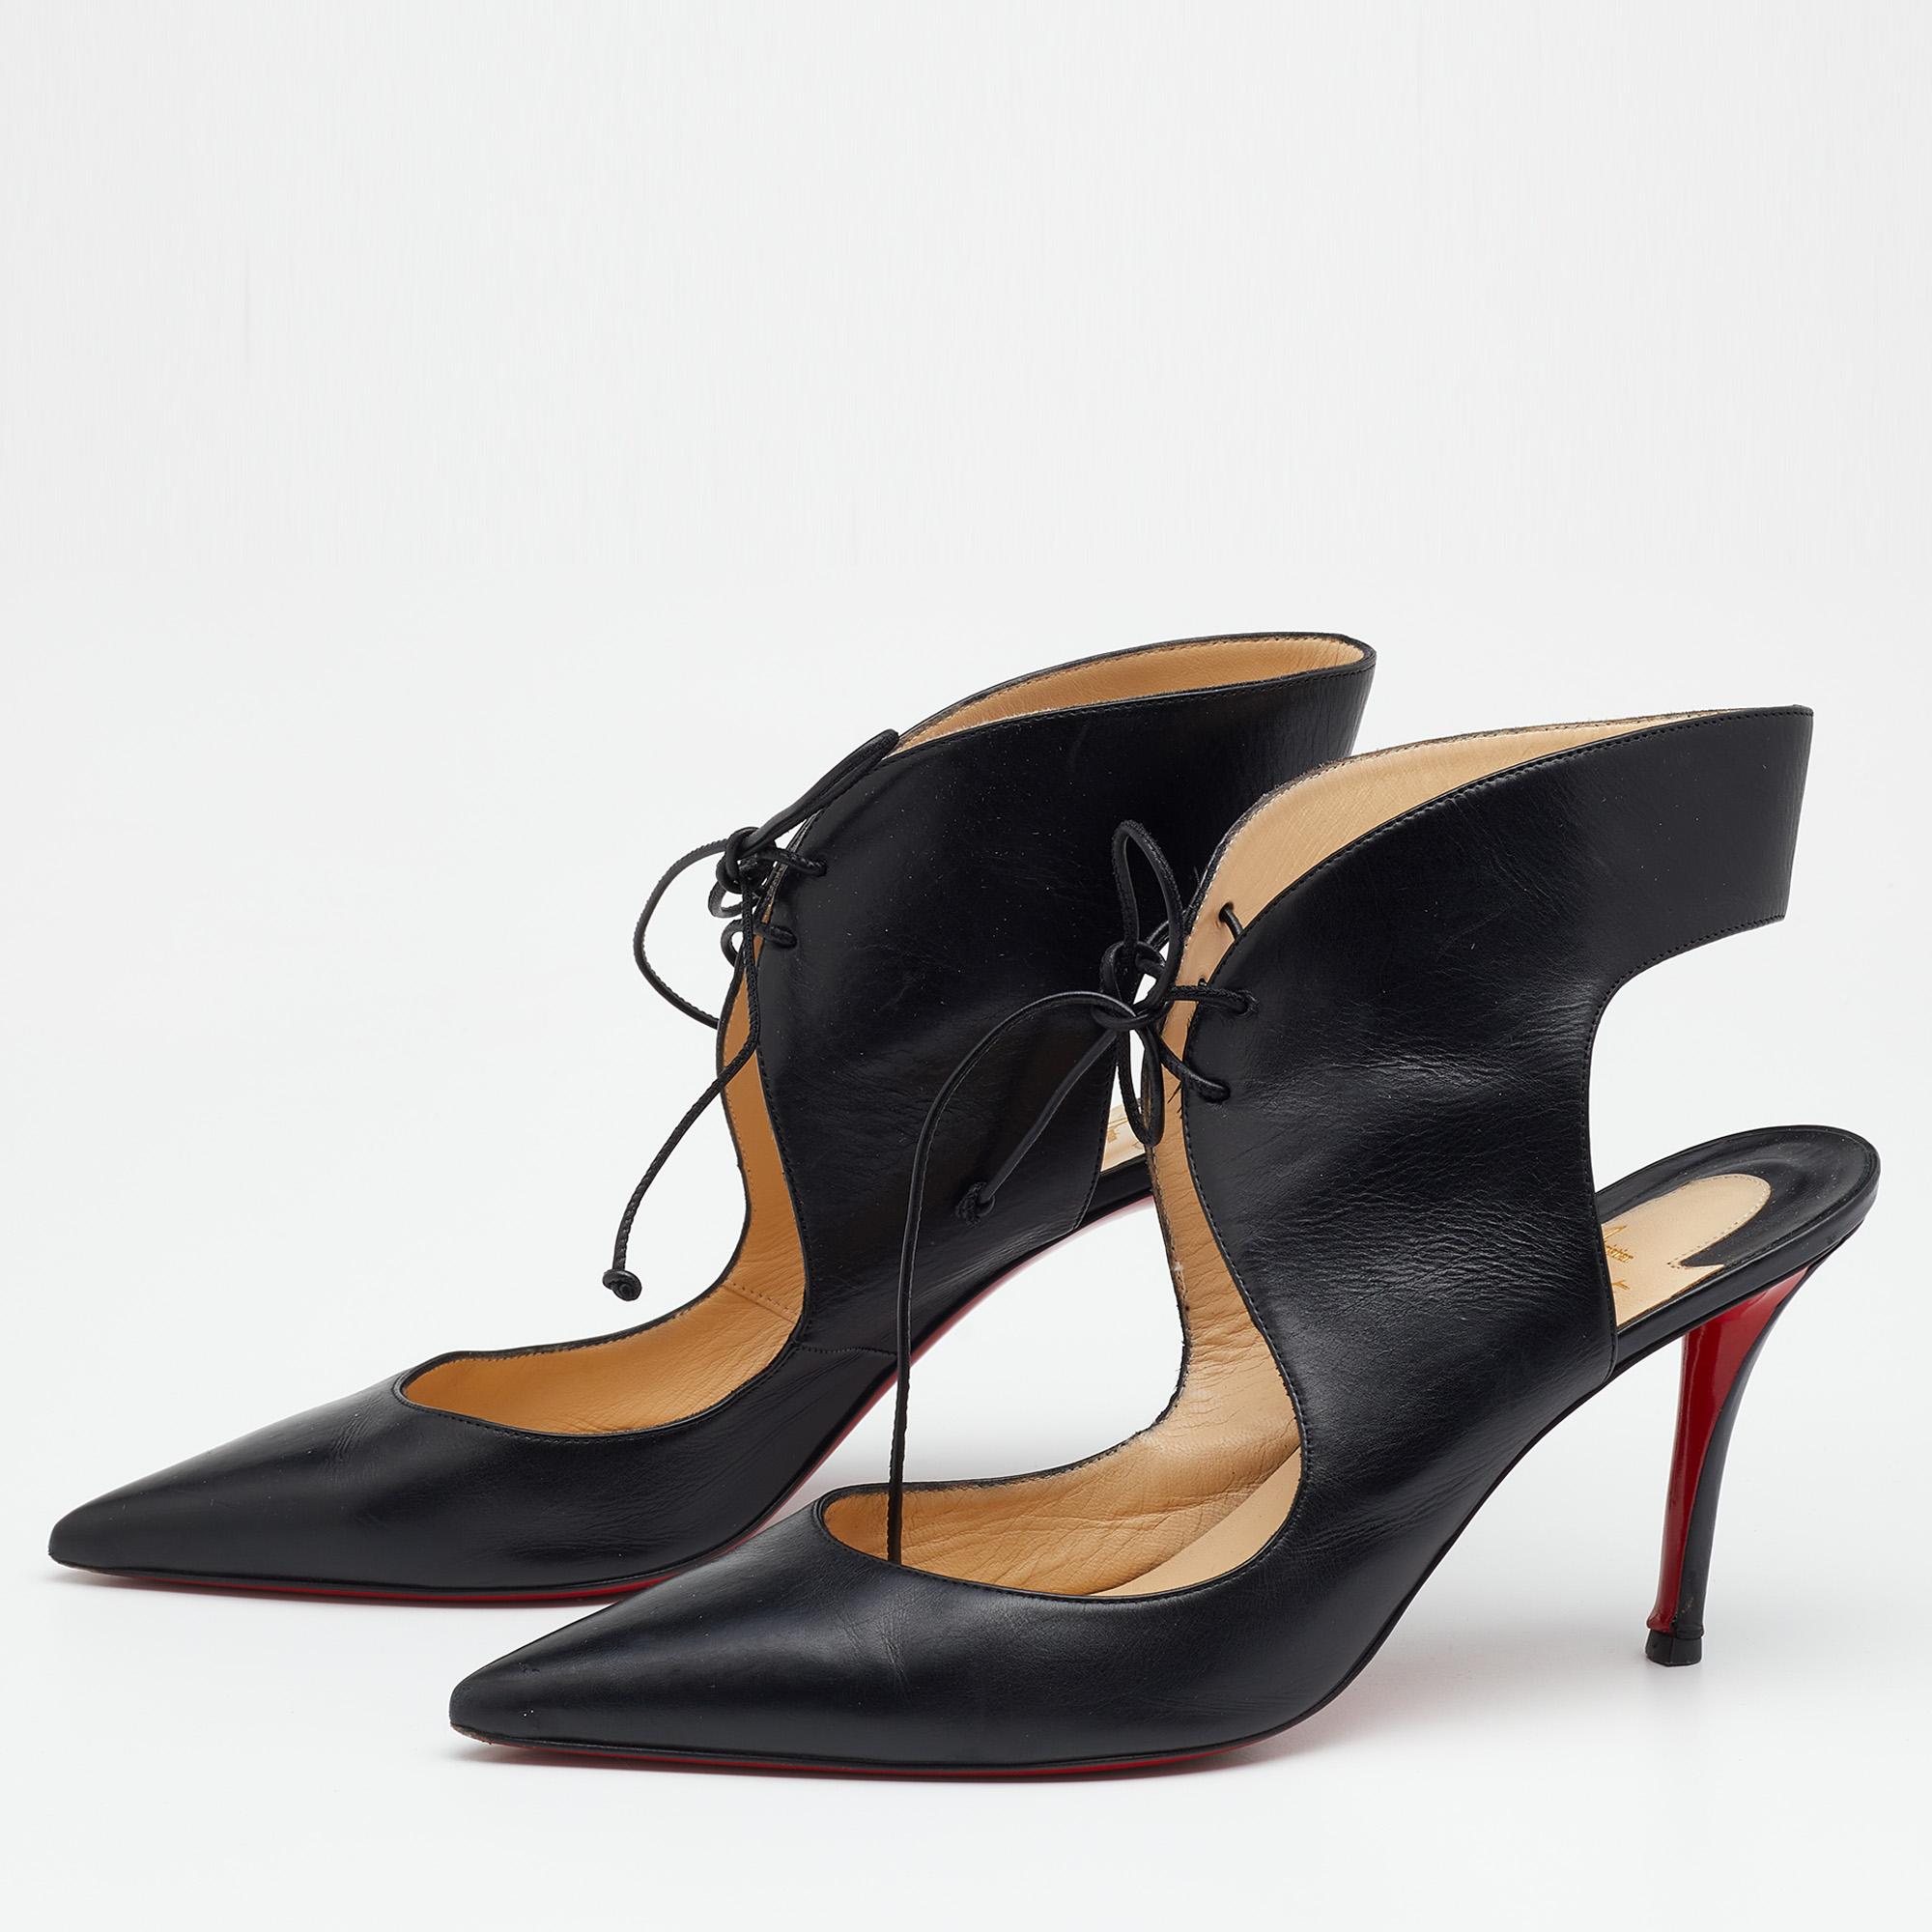 The attractive cut-out detailing and the architectural shape of this pair of Christian Louboutin pumps prove the brand's expertise in the art of stiletto making. Created from leather, it features pointed toes, tie-detailing at the ankles, and 9.5cm